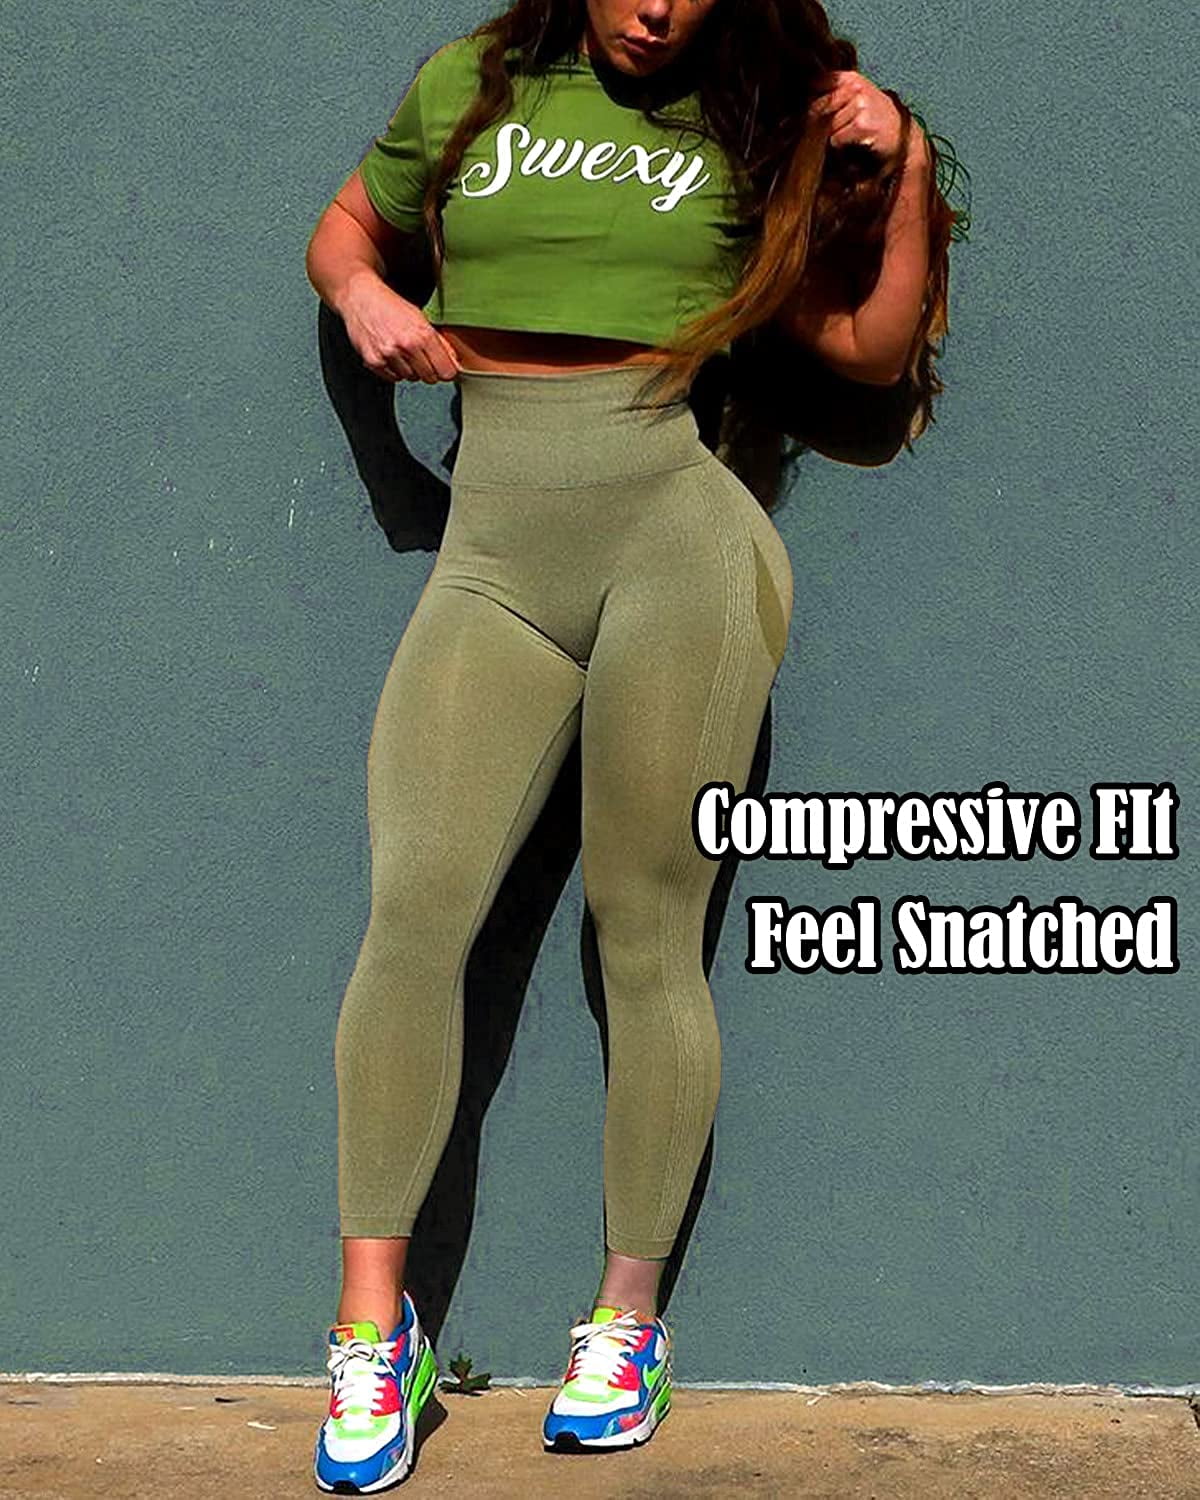 Womens High Waisted Yoga Pants, Tummy Control Peach Butt Lift Leggings,  Stretchy V Waistband Fitness Tights, Lemon Workout Gry LL From  Yoganiceonline, $21.44